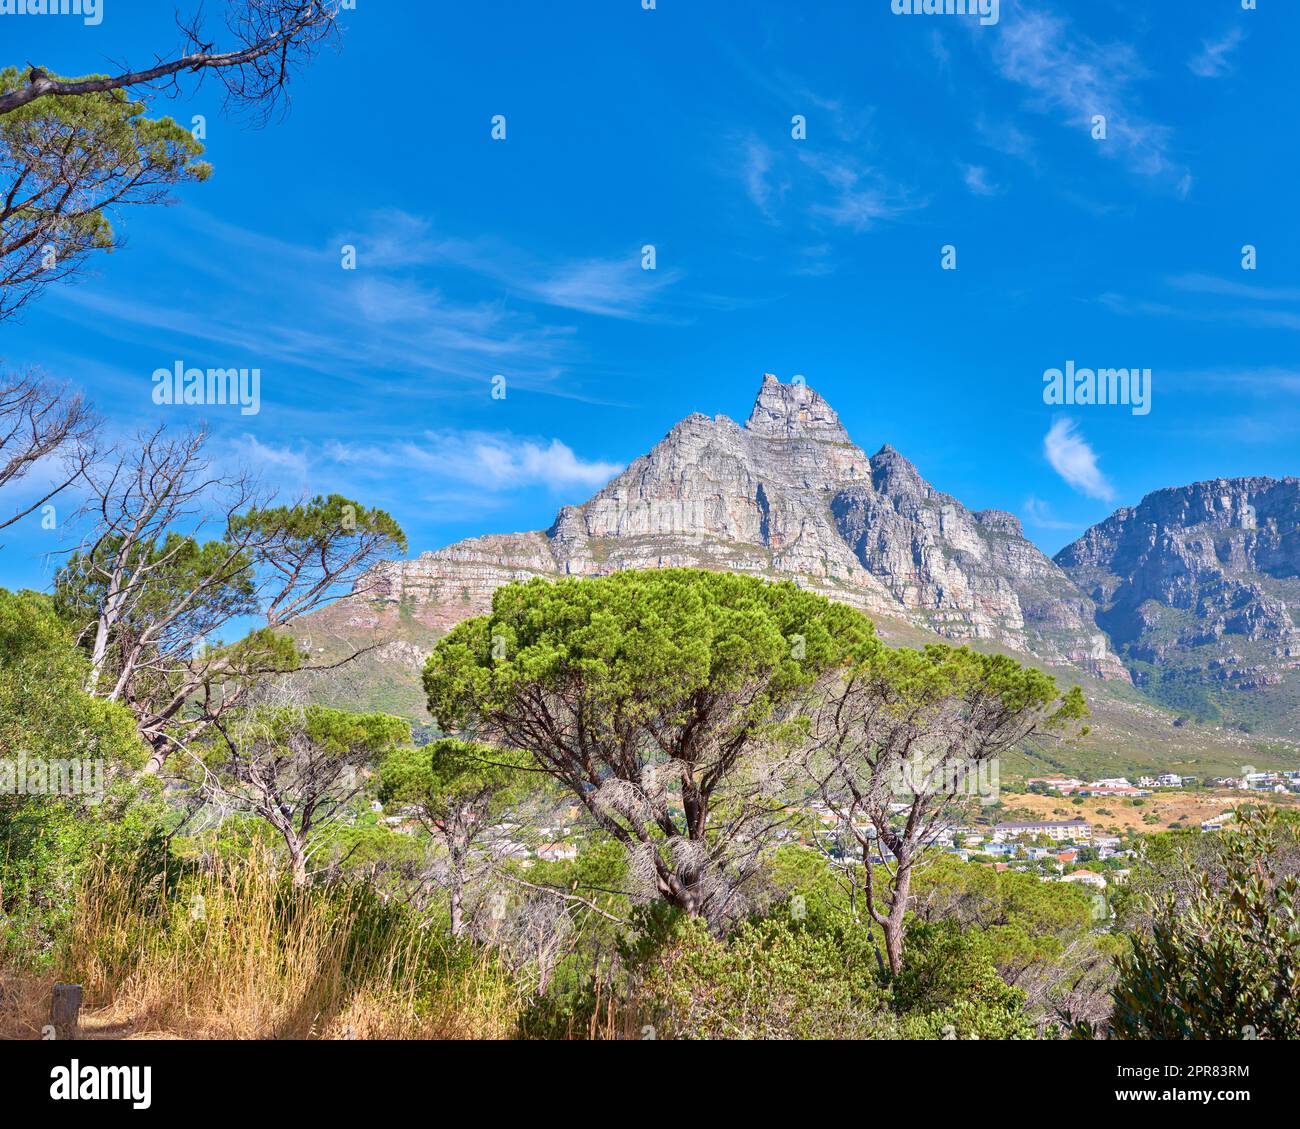 Copy space with a scenic landscape view of Table Mountain in Cape Town, South Africa against a blue sky background with trees and plants. Beautiful panoramic of an iconic landmark and natural wonder Stock Photo